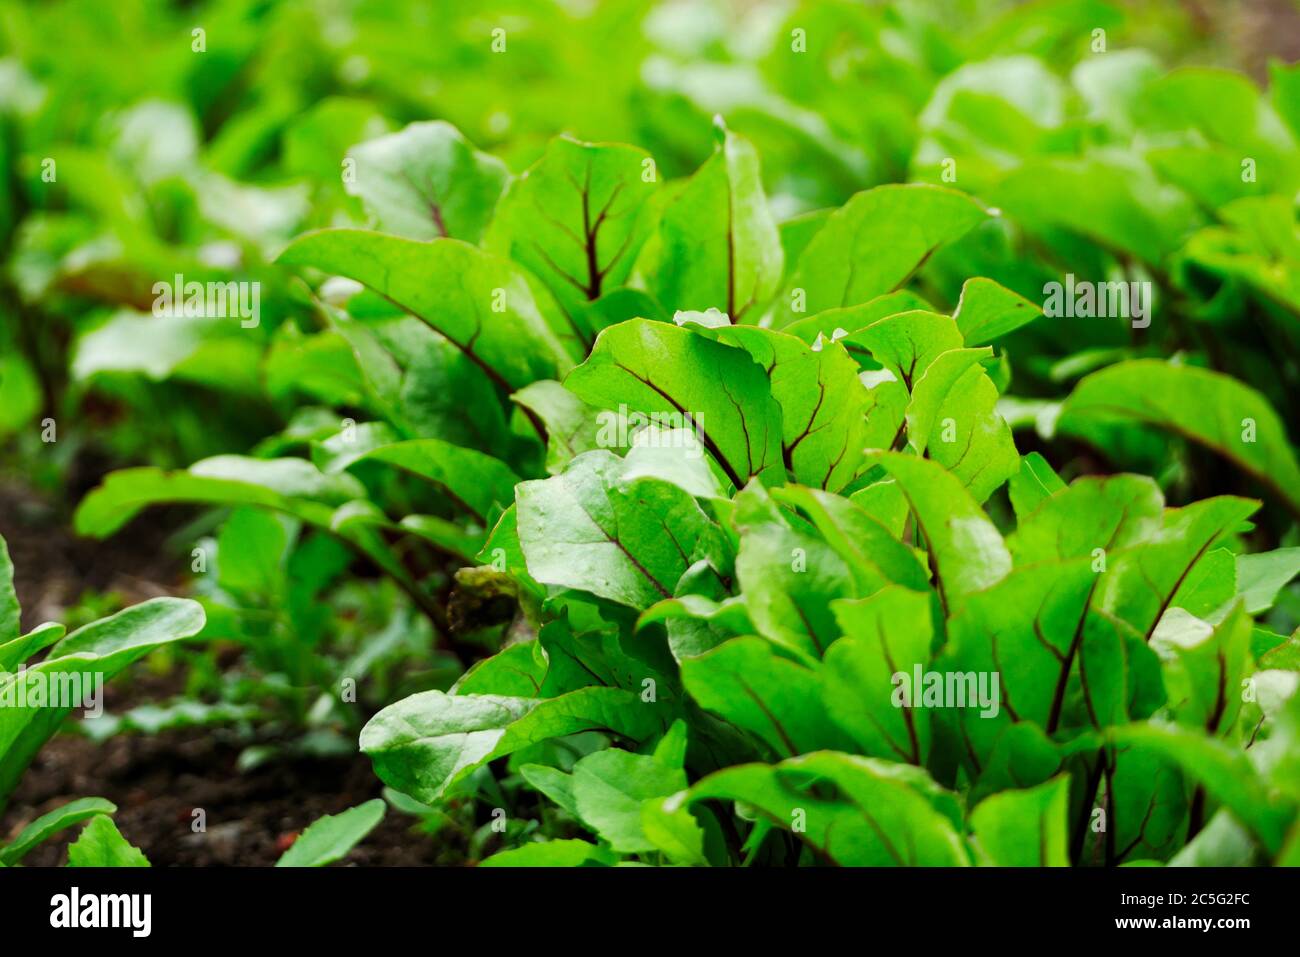 Young beets growing in a garden, with sun shining through leaves Stock Photo